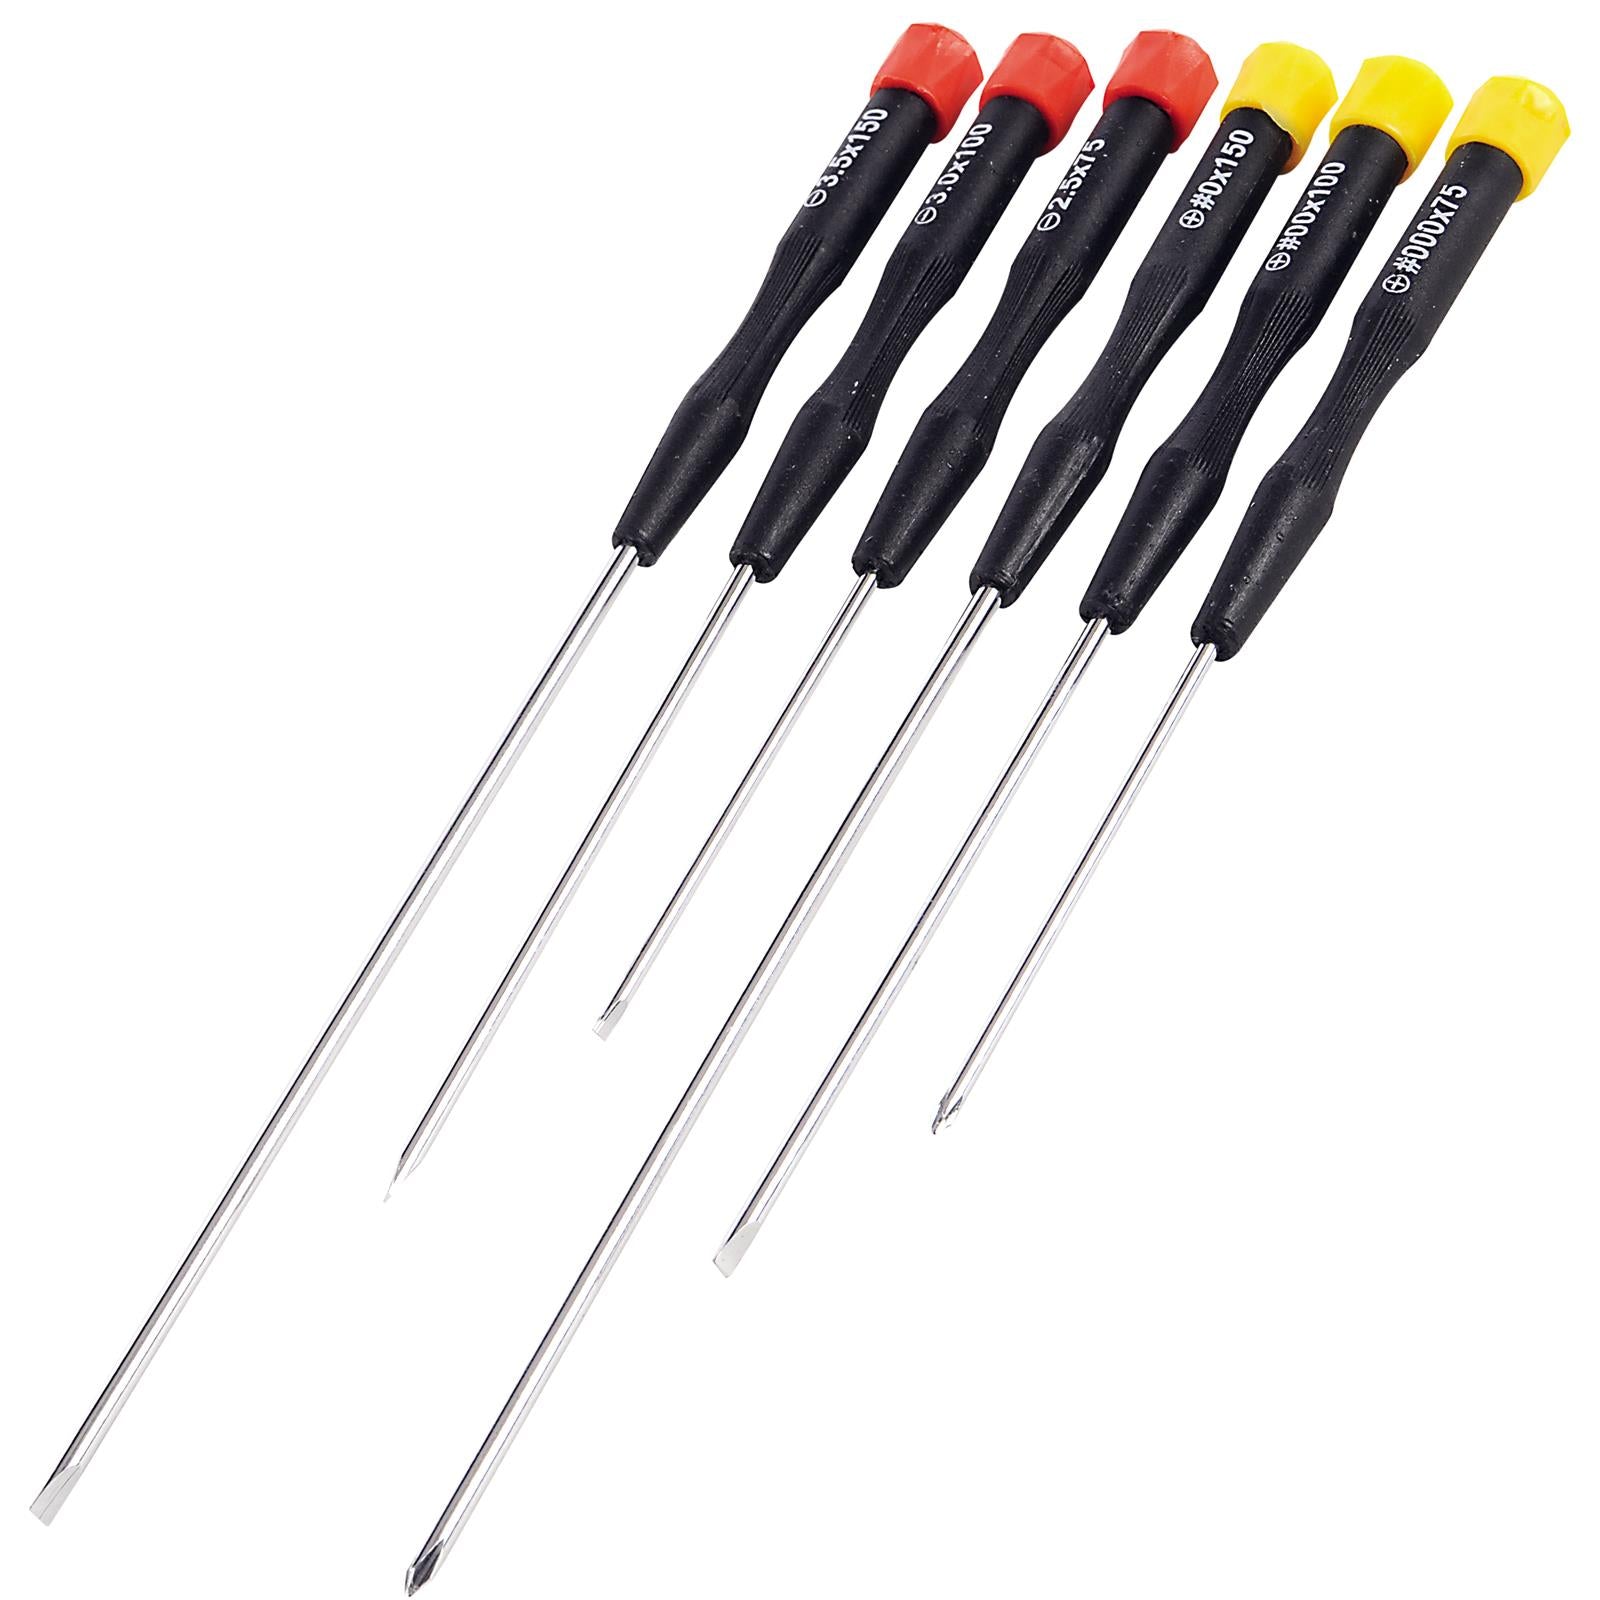 Silverline 6 Piece Extra Long Precision Screwdriver Set Slotted Phillips Swivel Top